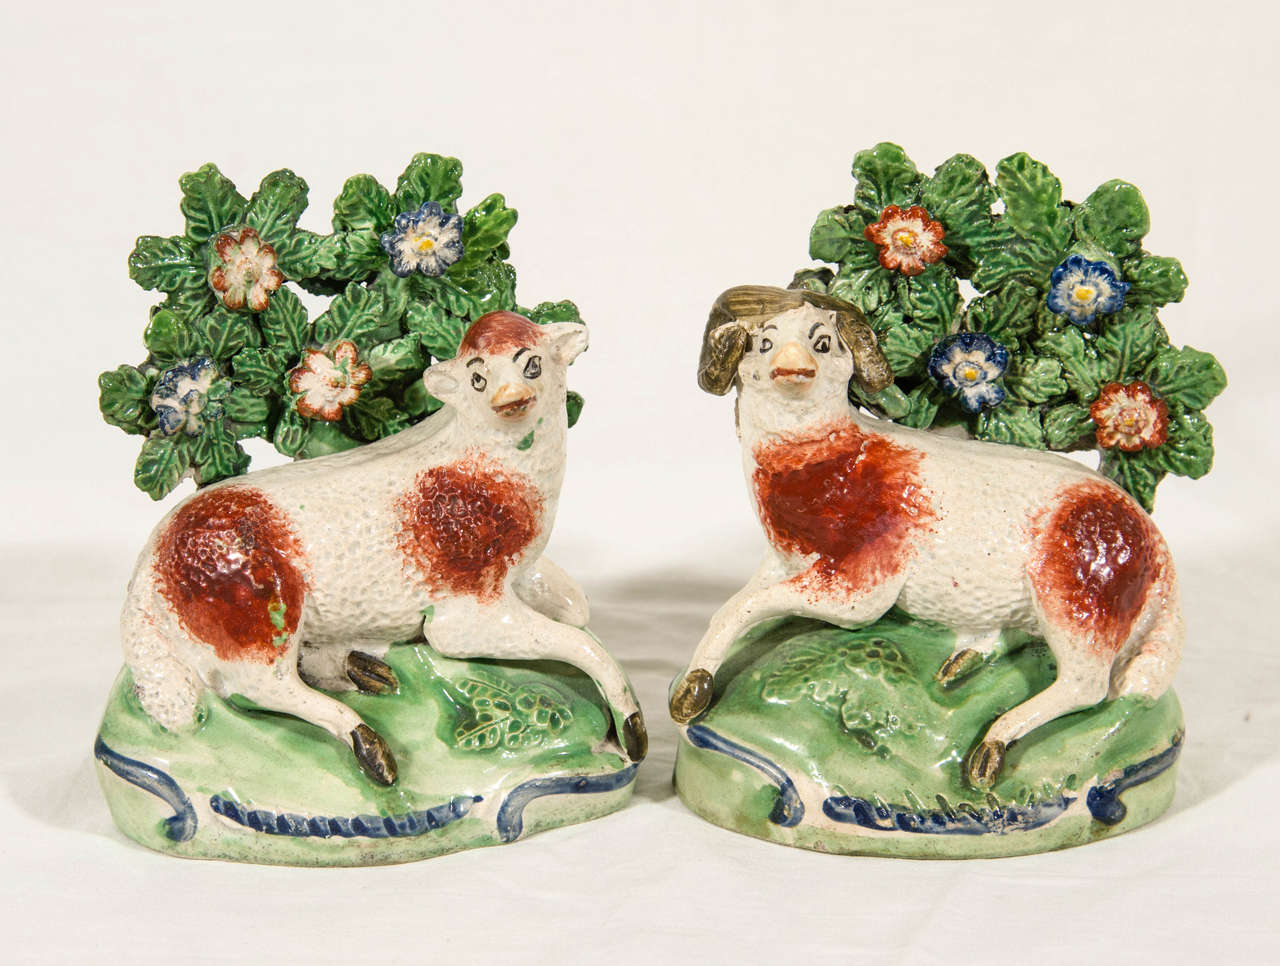 A charming and decorative pair of early Staffordshire pottery figures of a ram and ewe. They are a true pair modeled resting on 